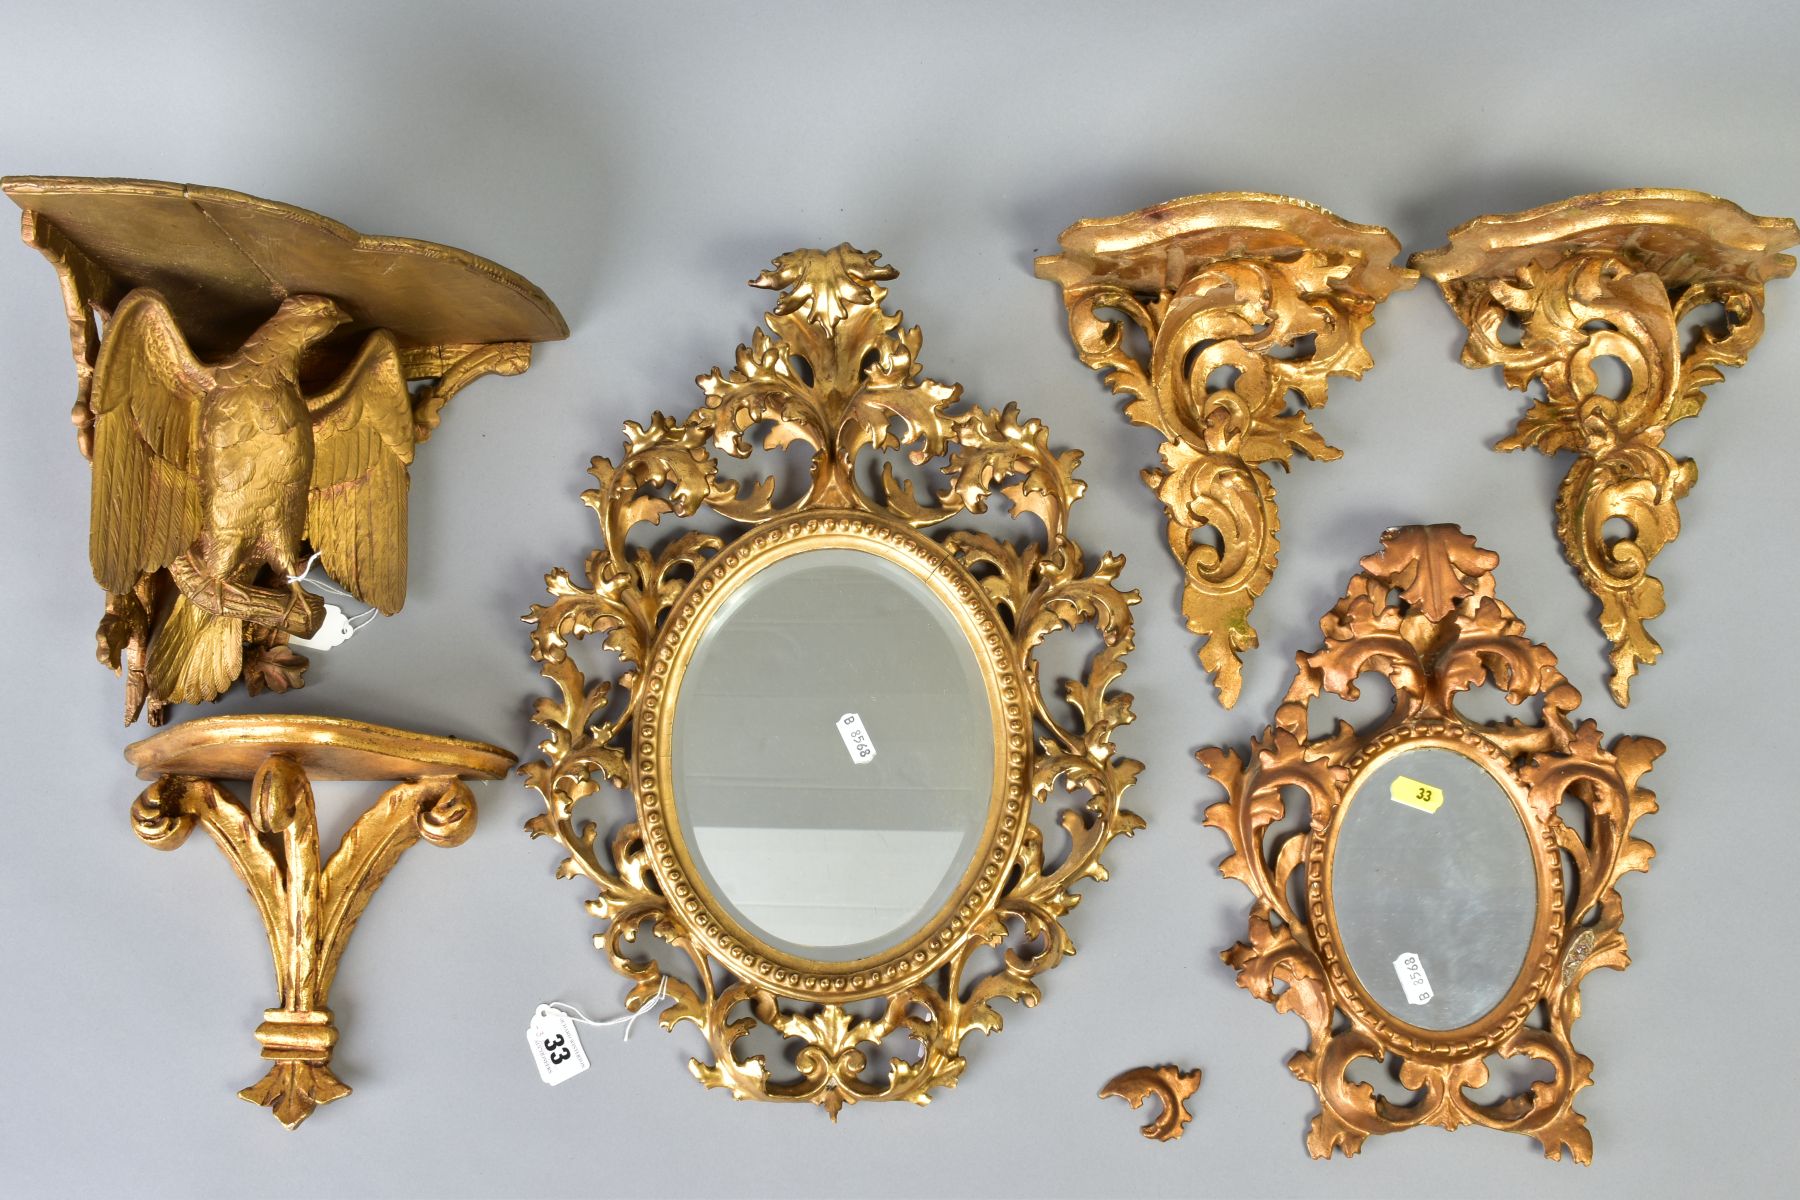 A COLLECTION OF SIX GILTWOOD ITEMS, comprising two small oval mirrors within ornate foliate